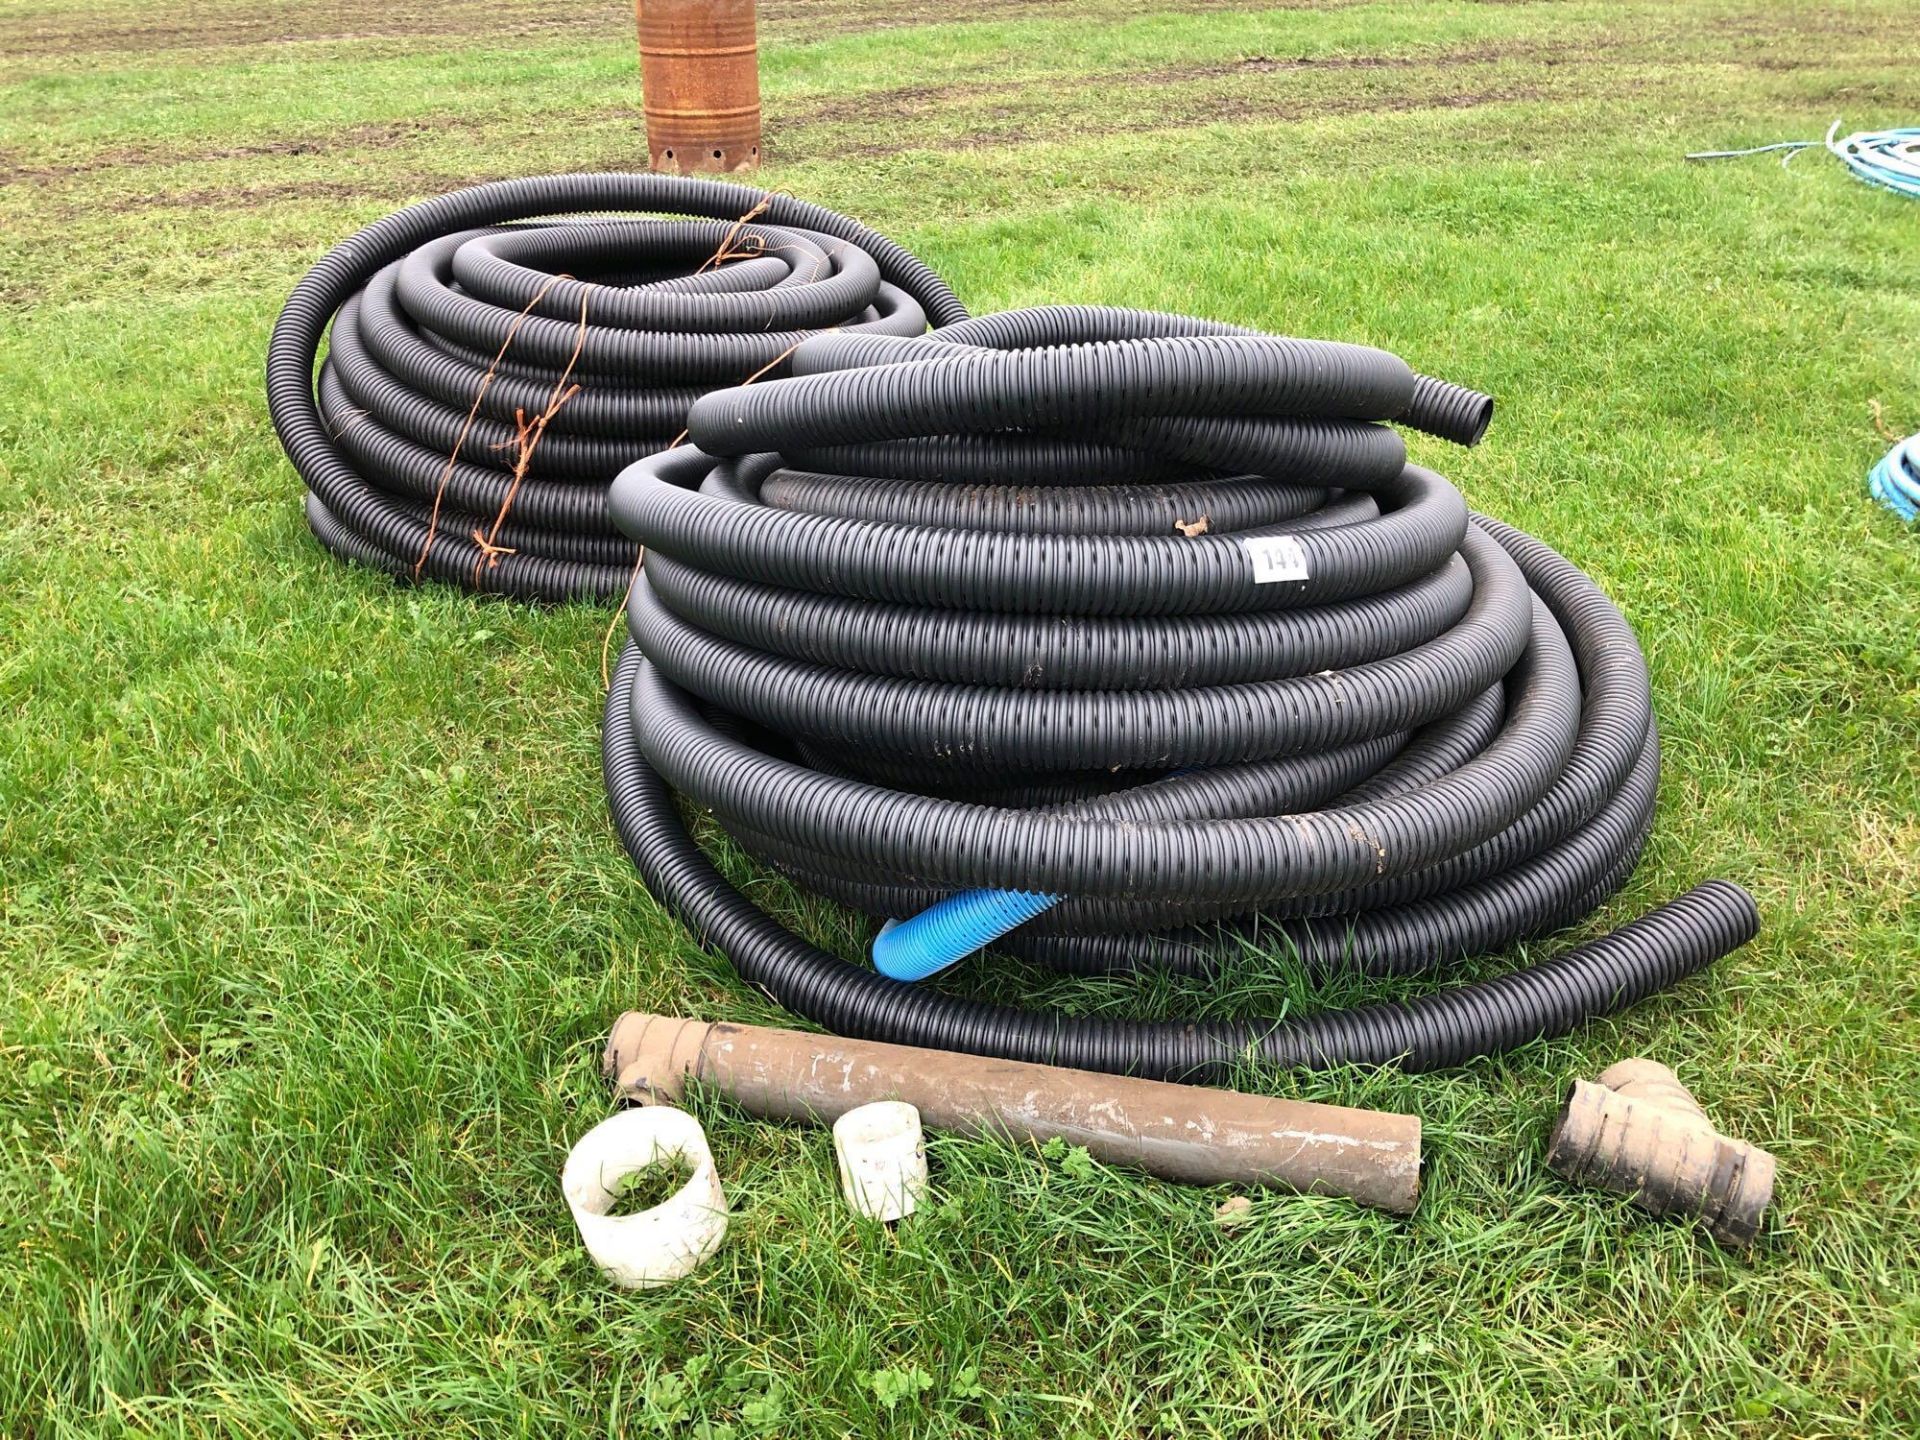 Quantity 4" perforated drainage pipe